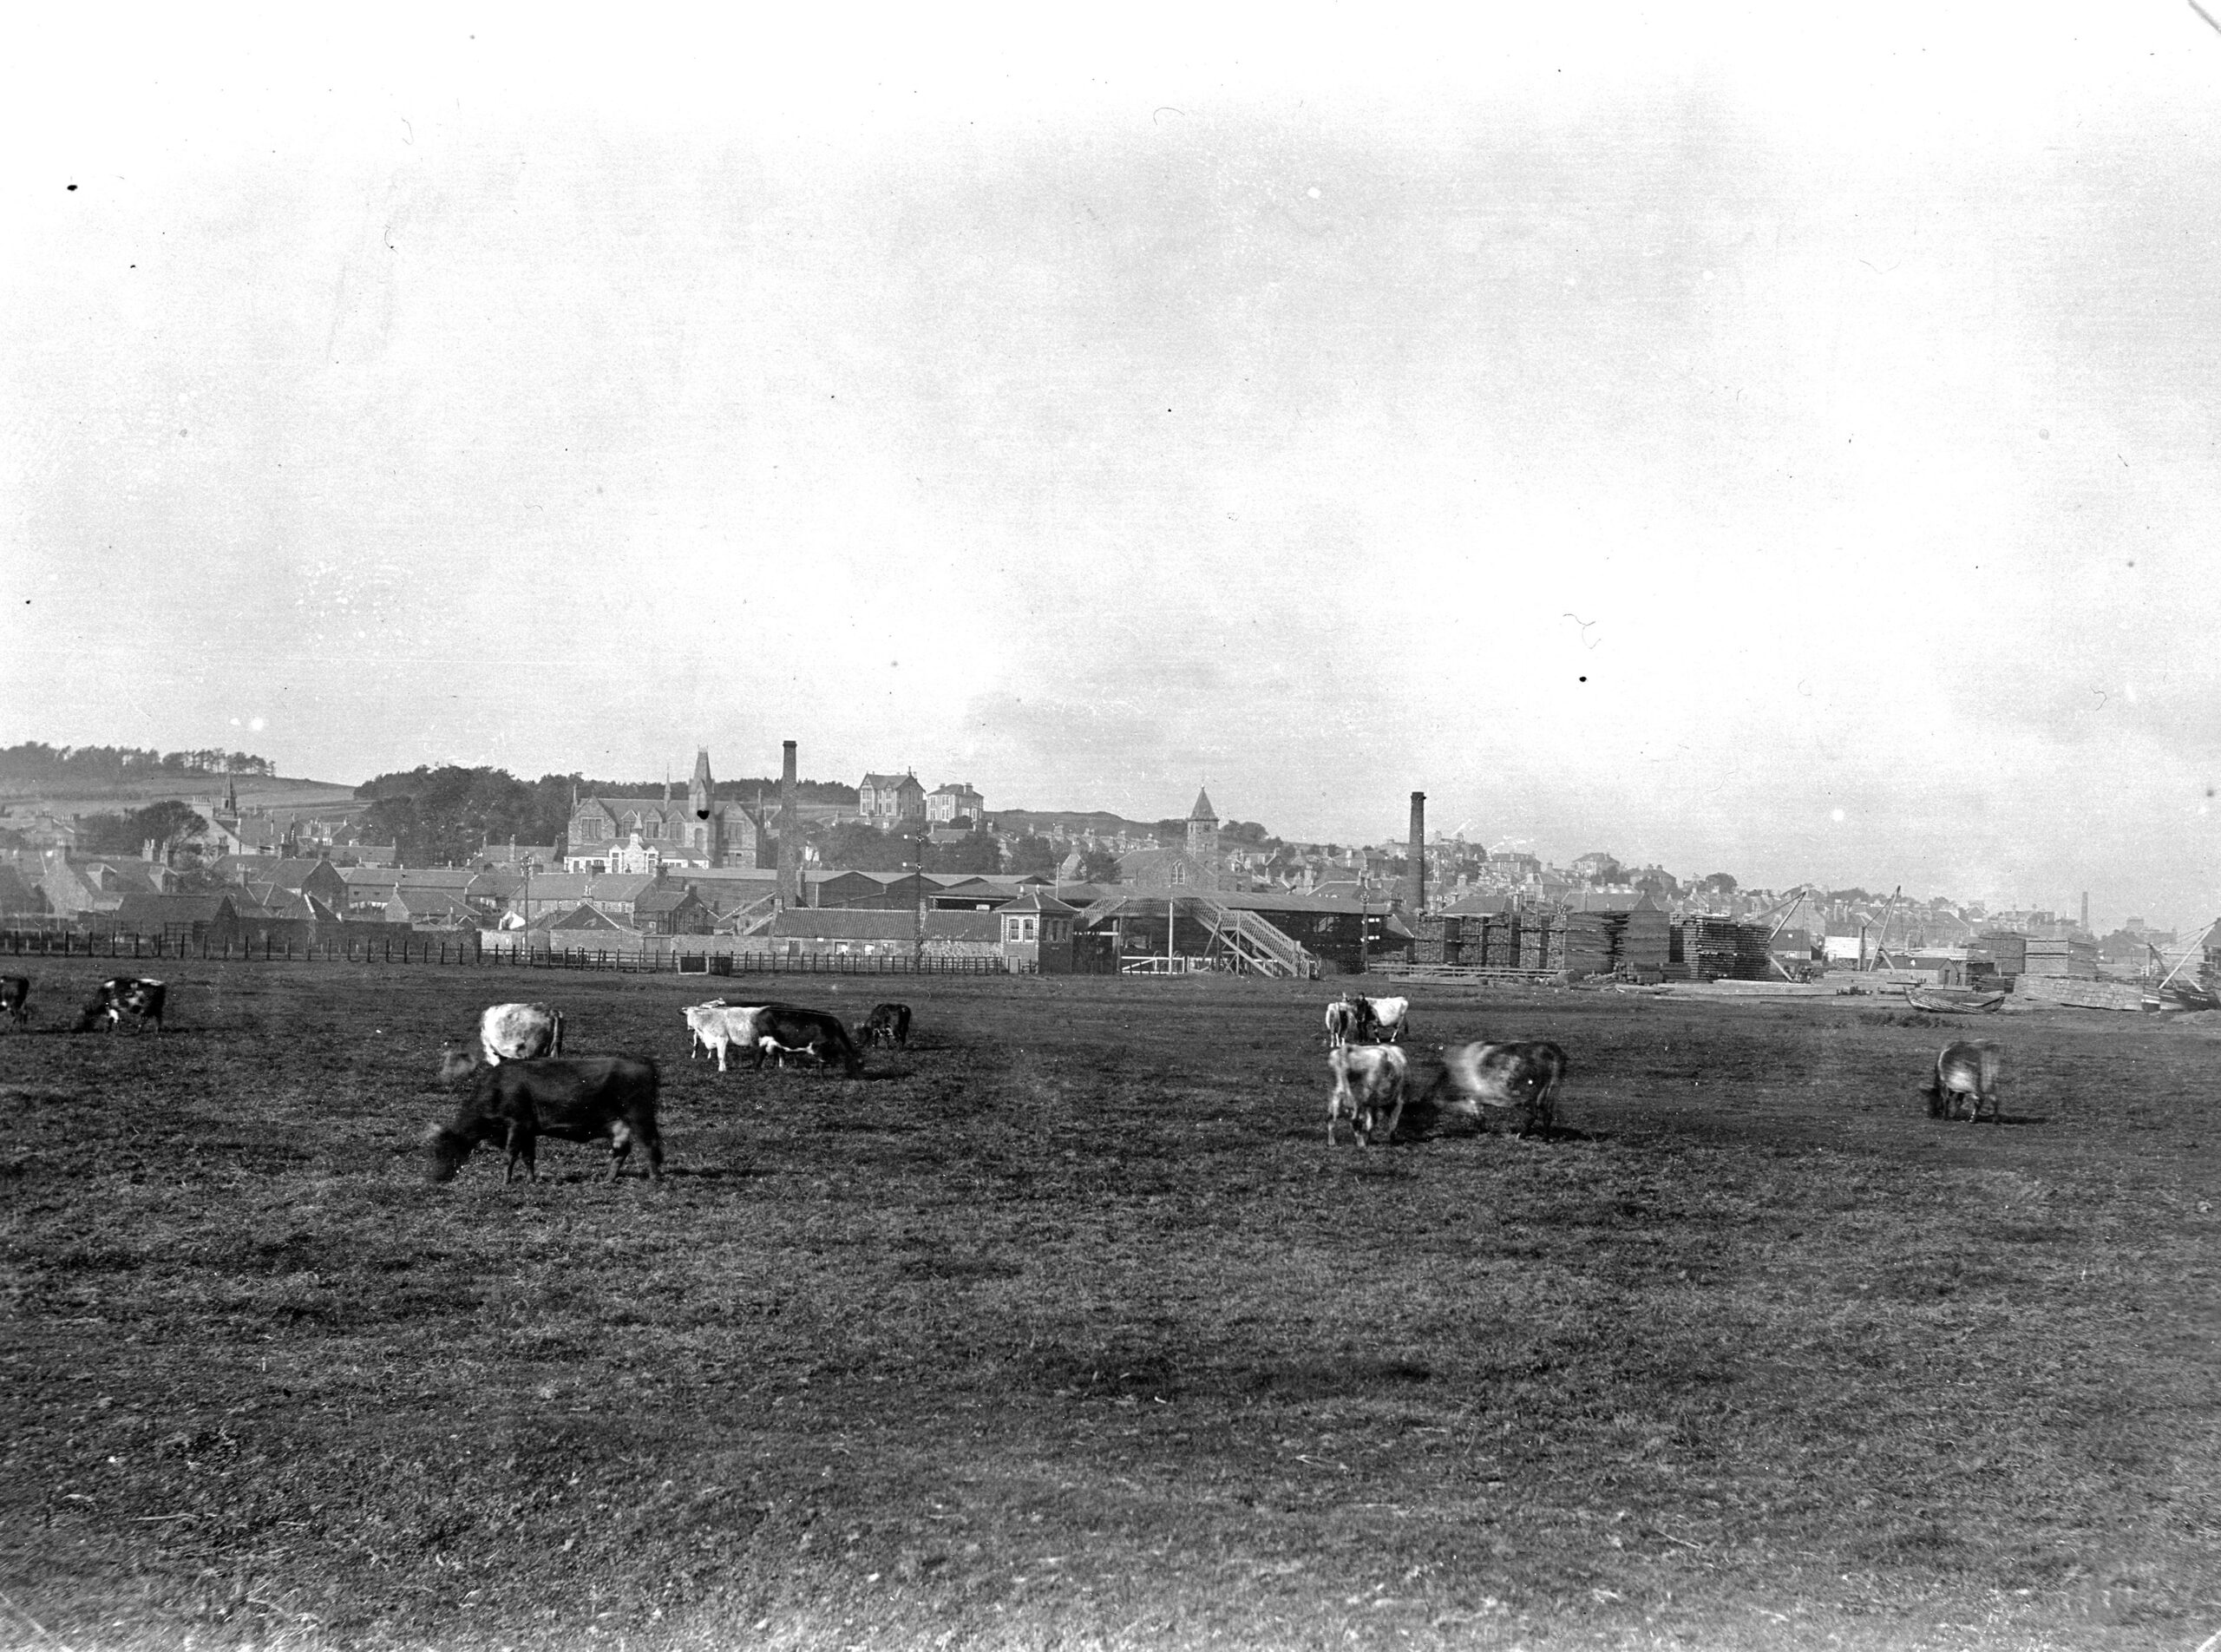 Tayport Heritage Trail - Board 20 - Cattle on East Common early 1900s with Donaldson’s woodyard in background